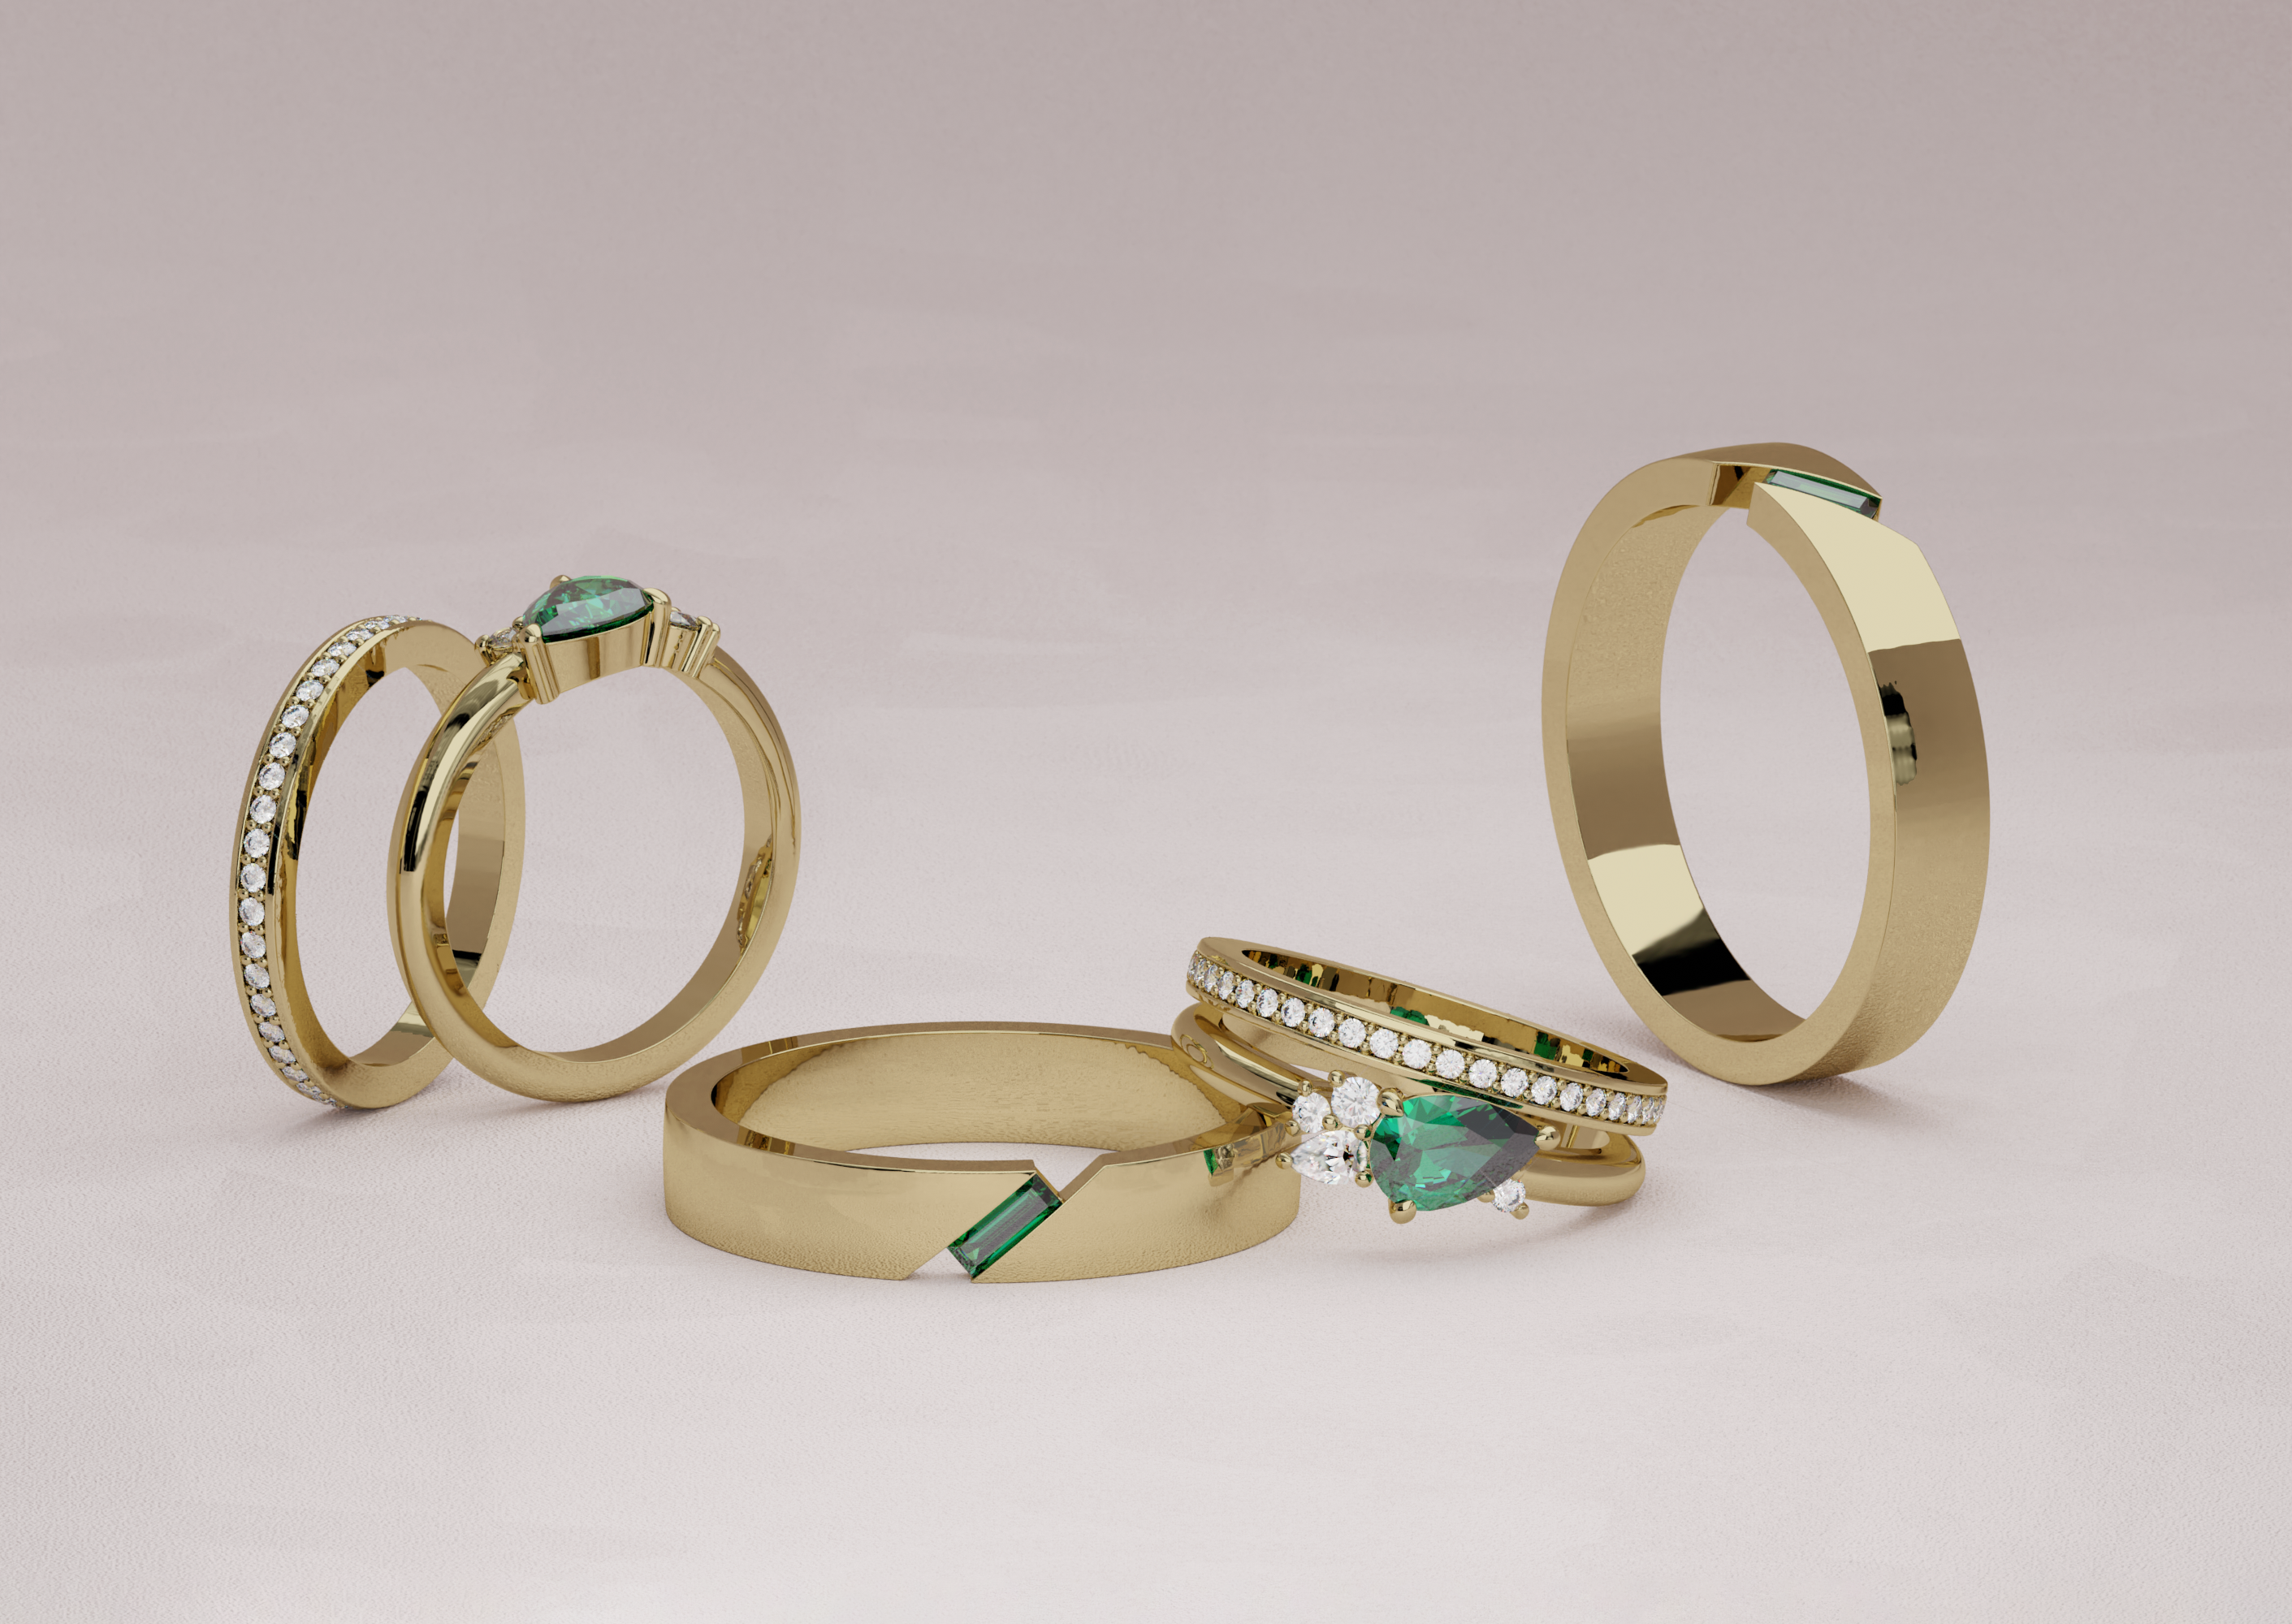 His and hers yellow gold bridal set featuring diamonds and emeralds